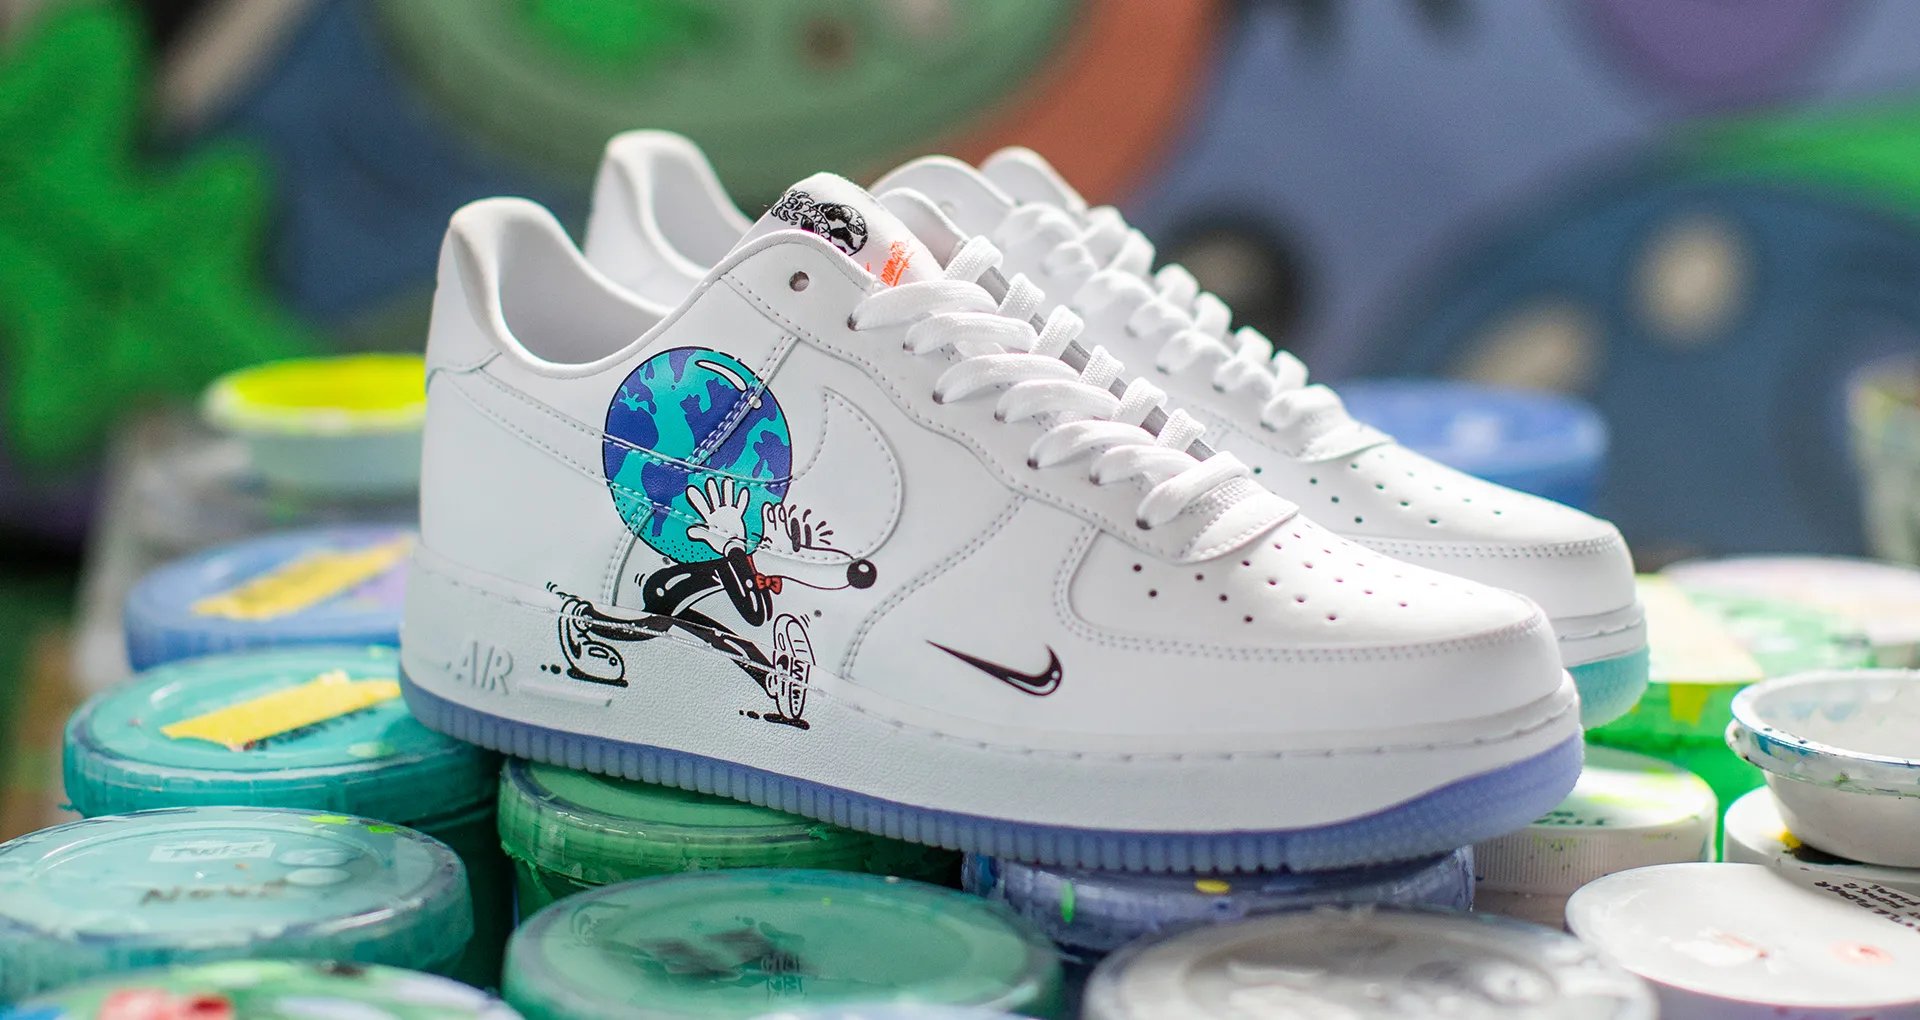 Fullress on Twitter: "4/26 SNKRS リストック！ ナイキ “フライレザー QS アース ディ パック” エア フォース ロー (NIKE “Flyleather Earth Day Pack” AIR FORCE 1 LOW/CORTEZ/BLAZER LOW) https://t.co/sI5x5kn1xD https://t.co/06XYAb9wMB ...